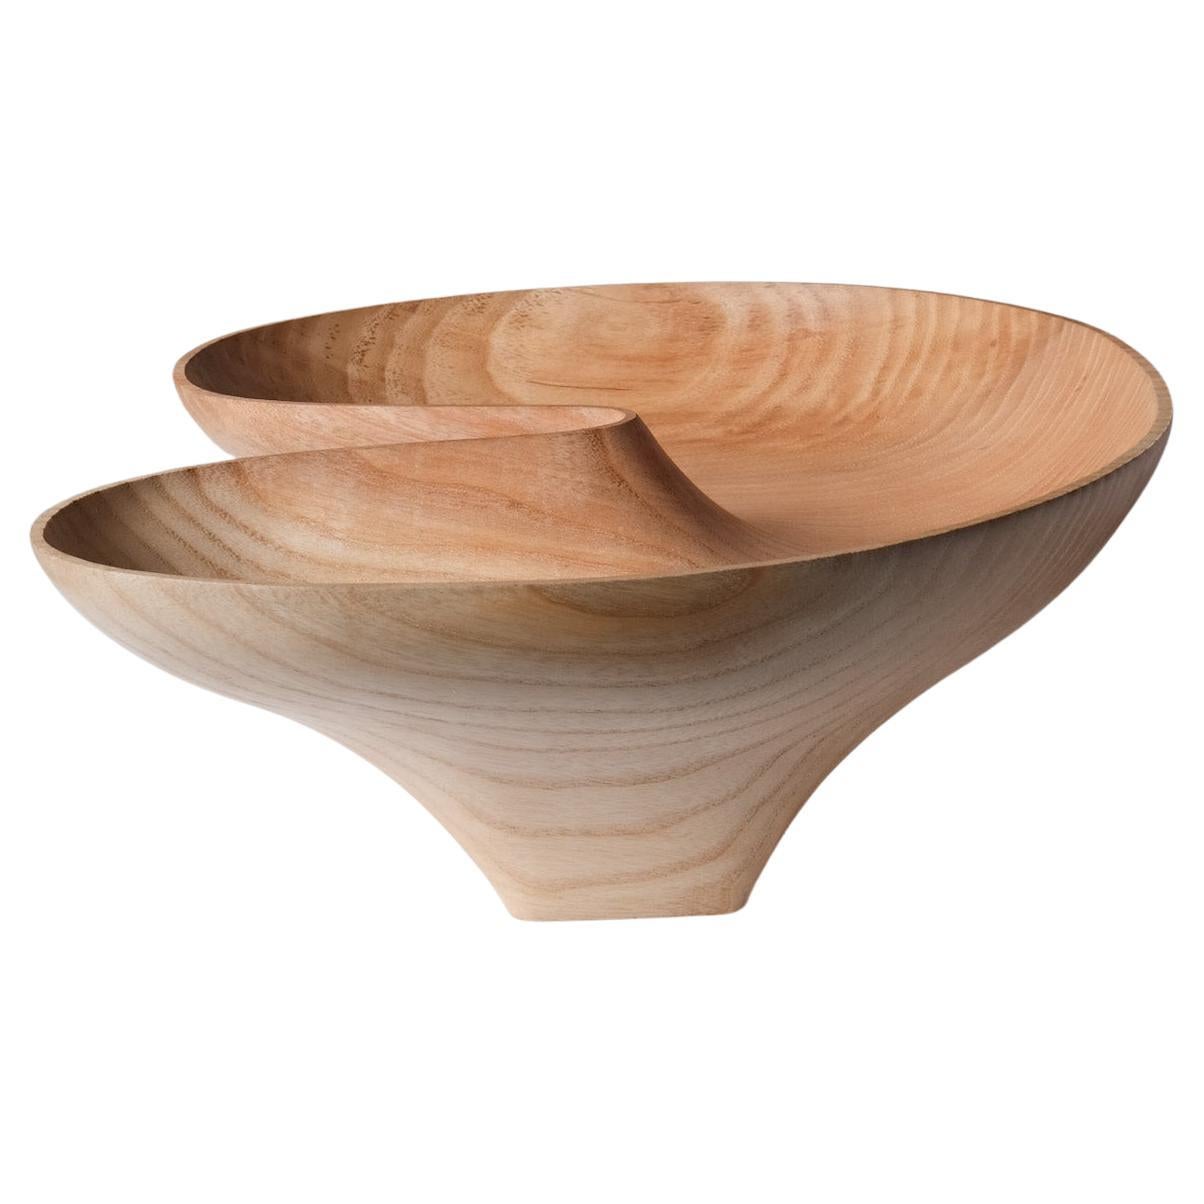 Ash Curved Bowl by Etienne Bailleul